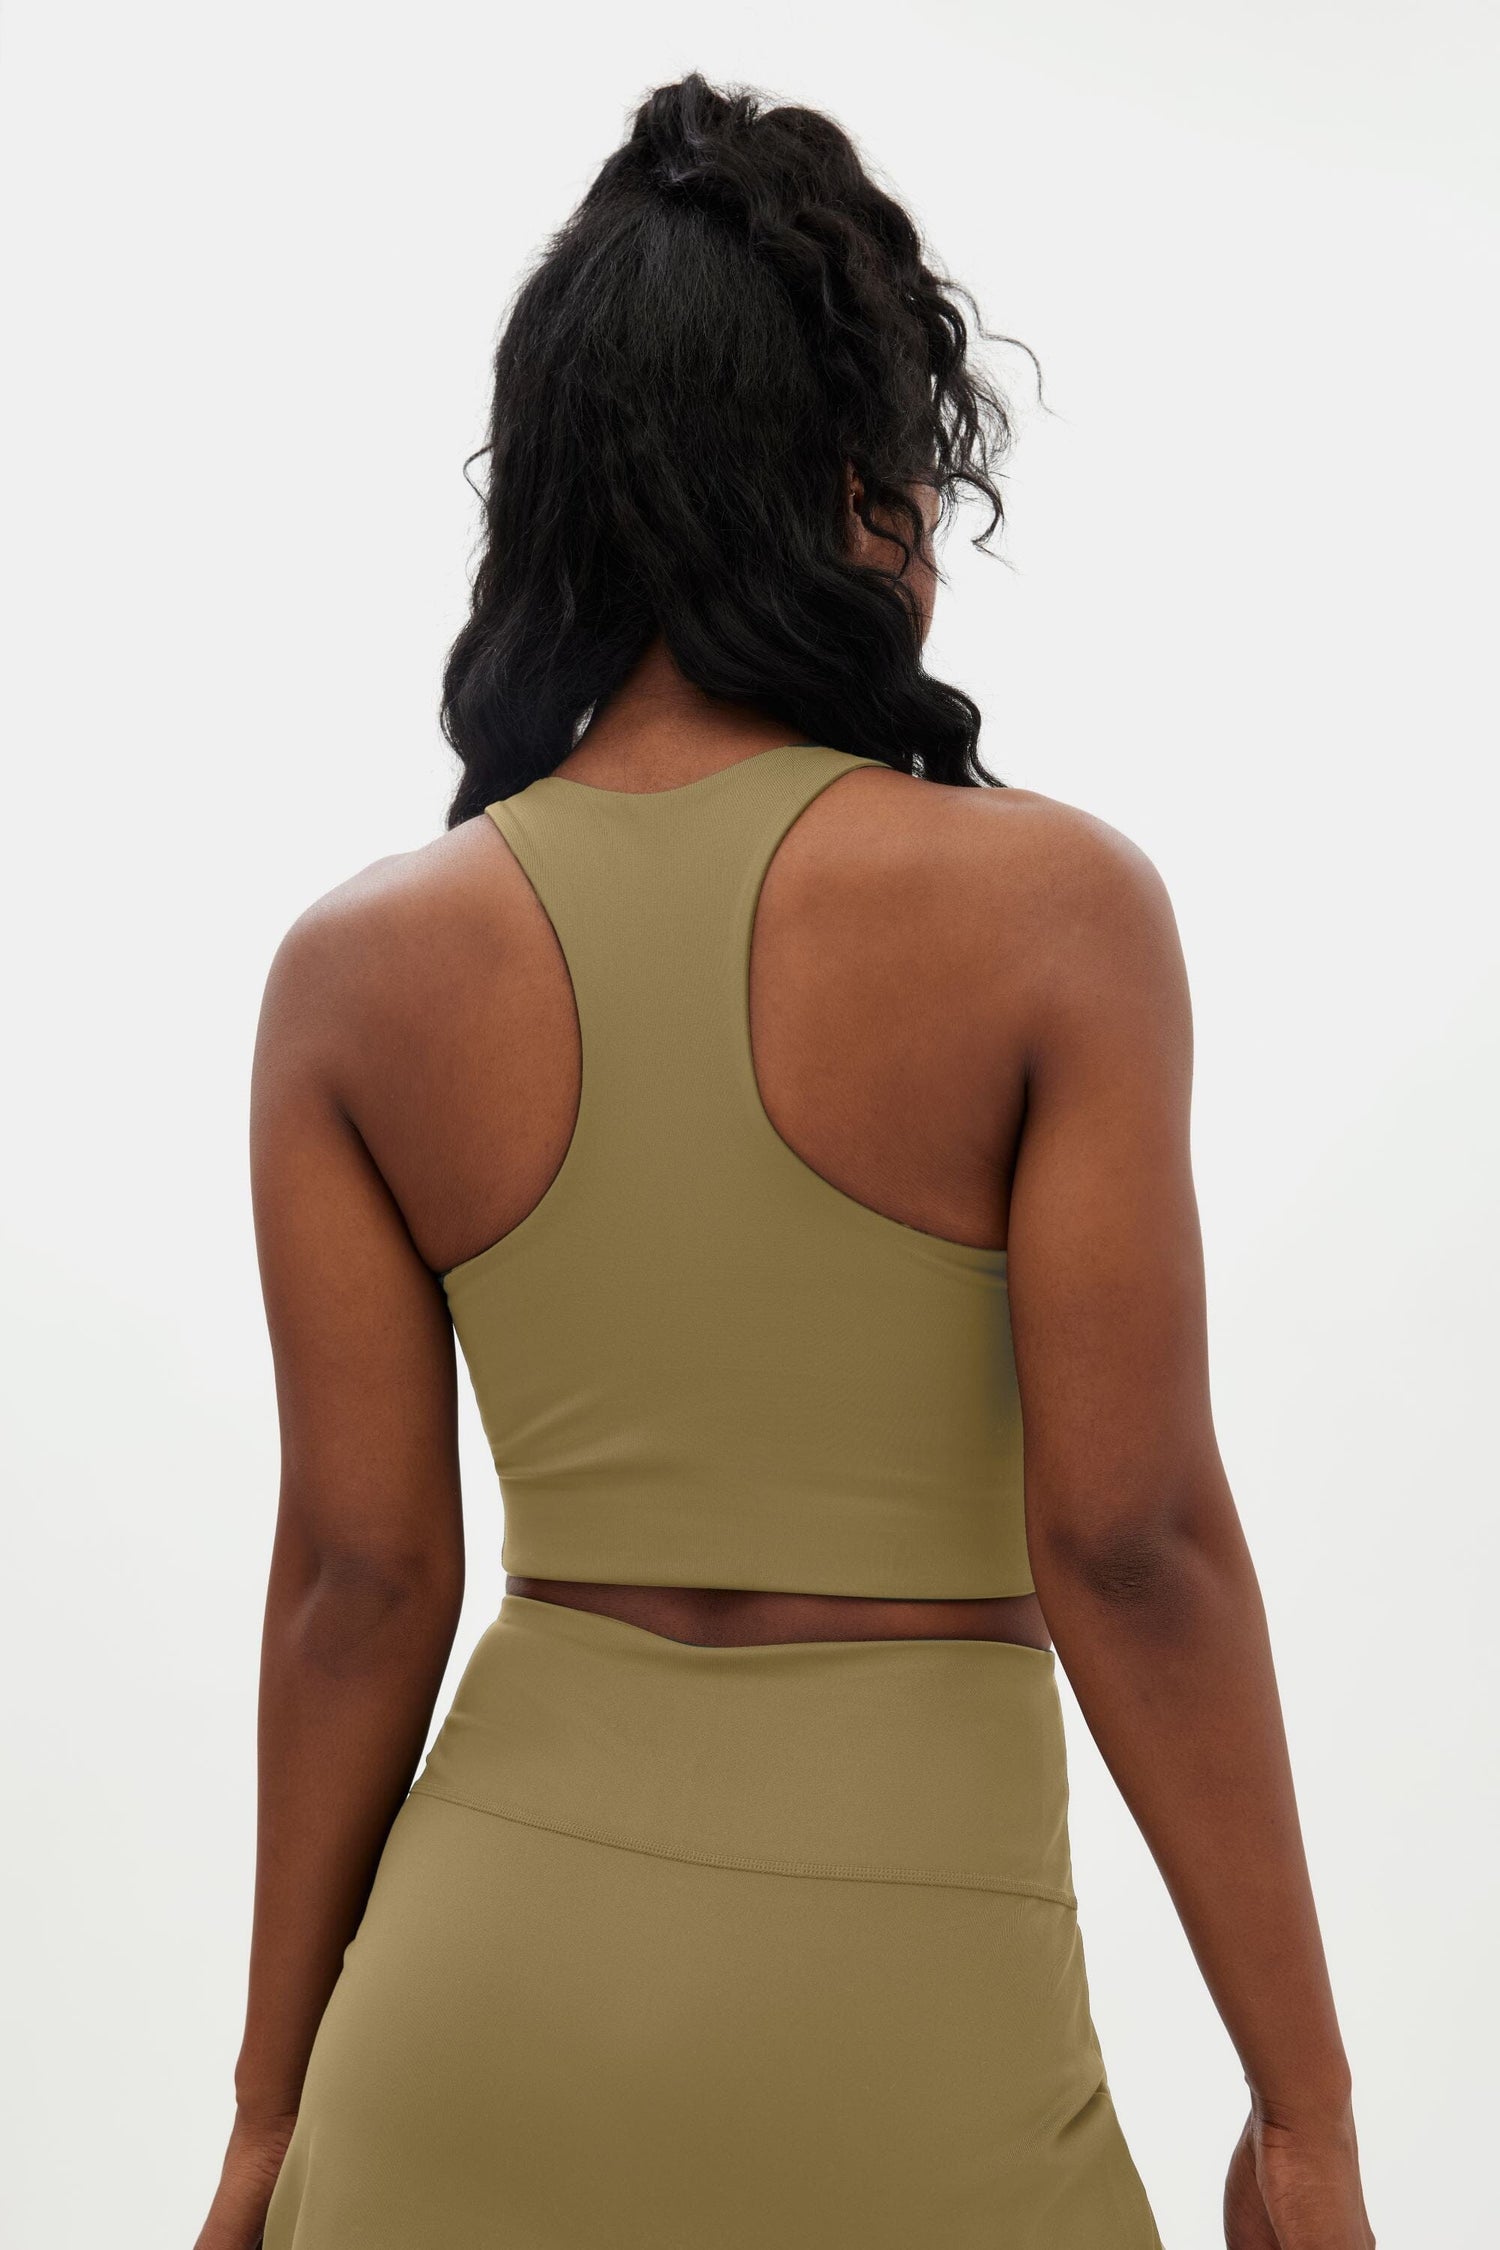 Girlfriend Collective Paloma Classic Sports Bra - Made from recycled plastic bottles Artichoke Underwear